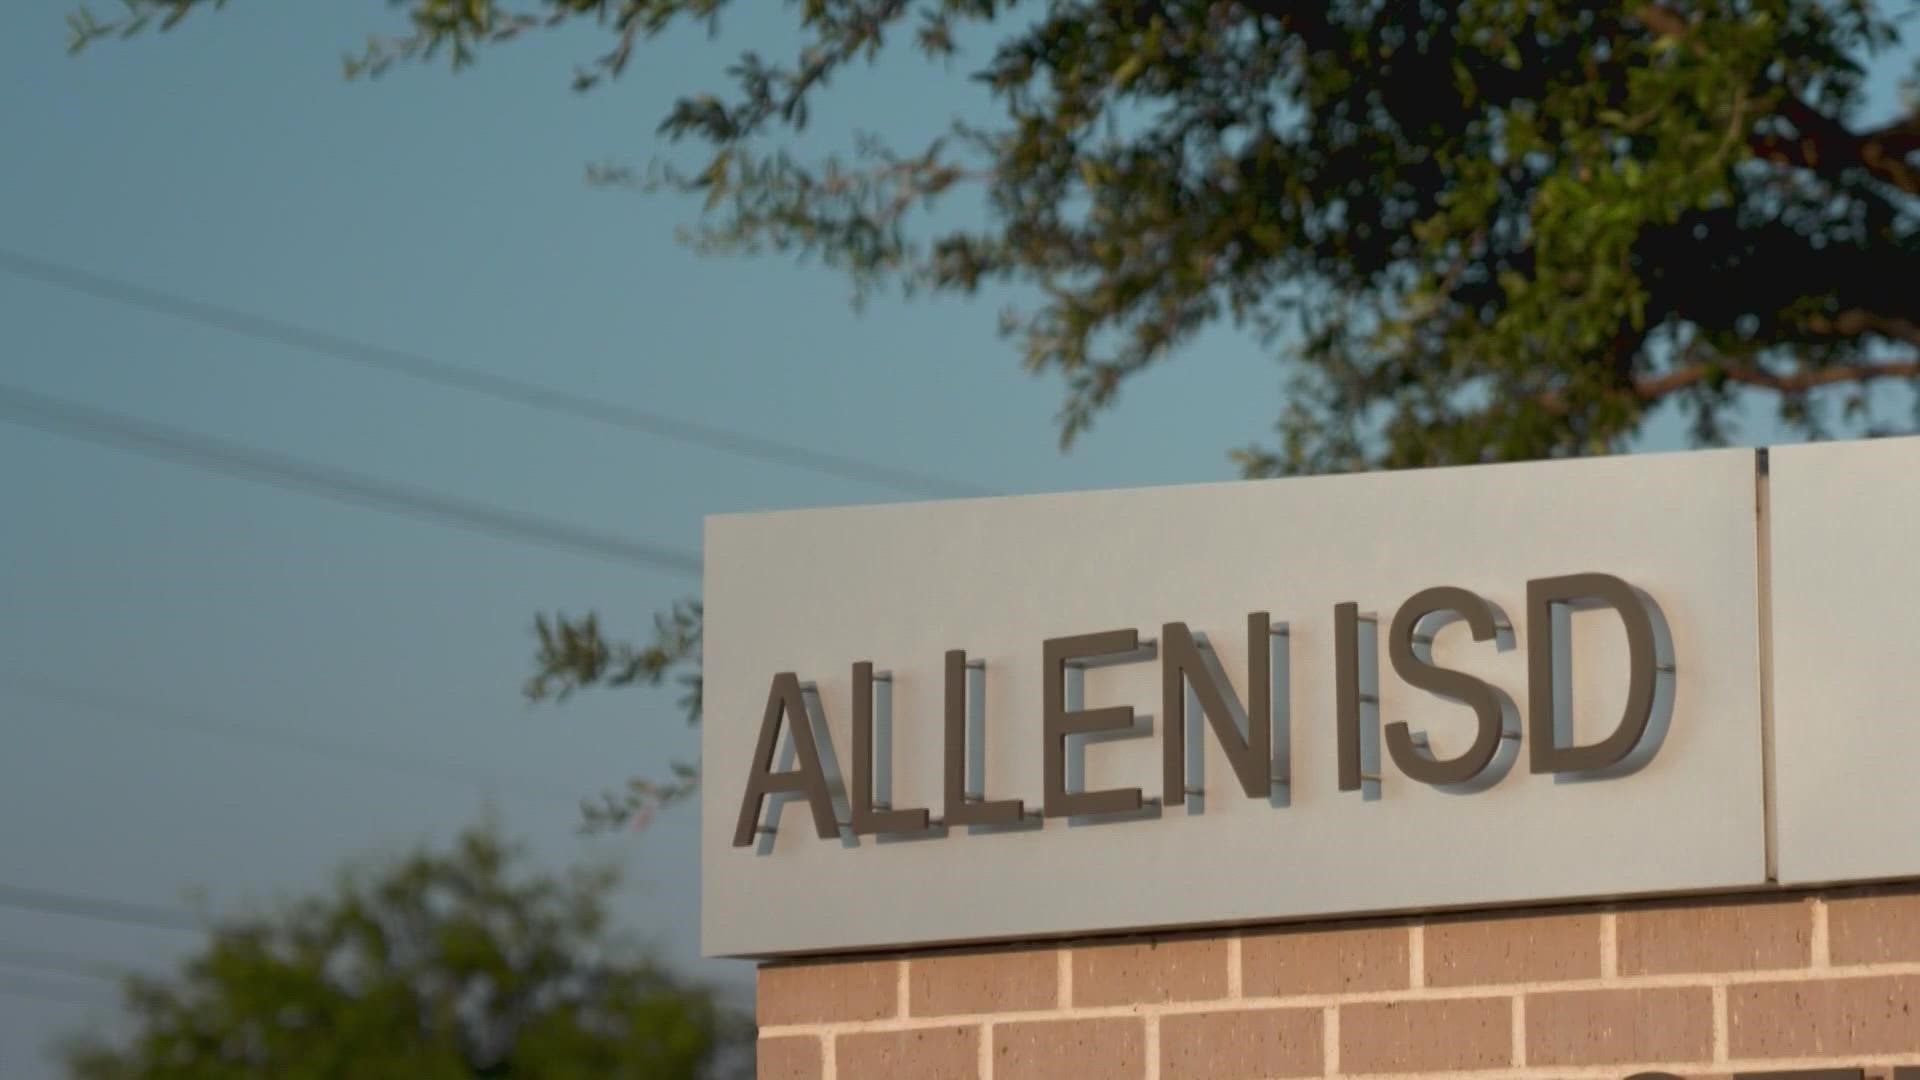 The parents of Mike Hawkins Jr. pulled him and his brother from Allen High School after the incident.